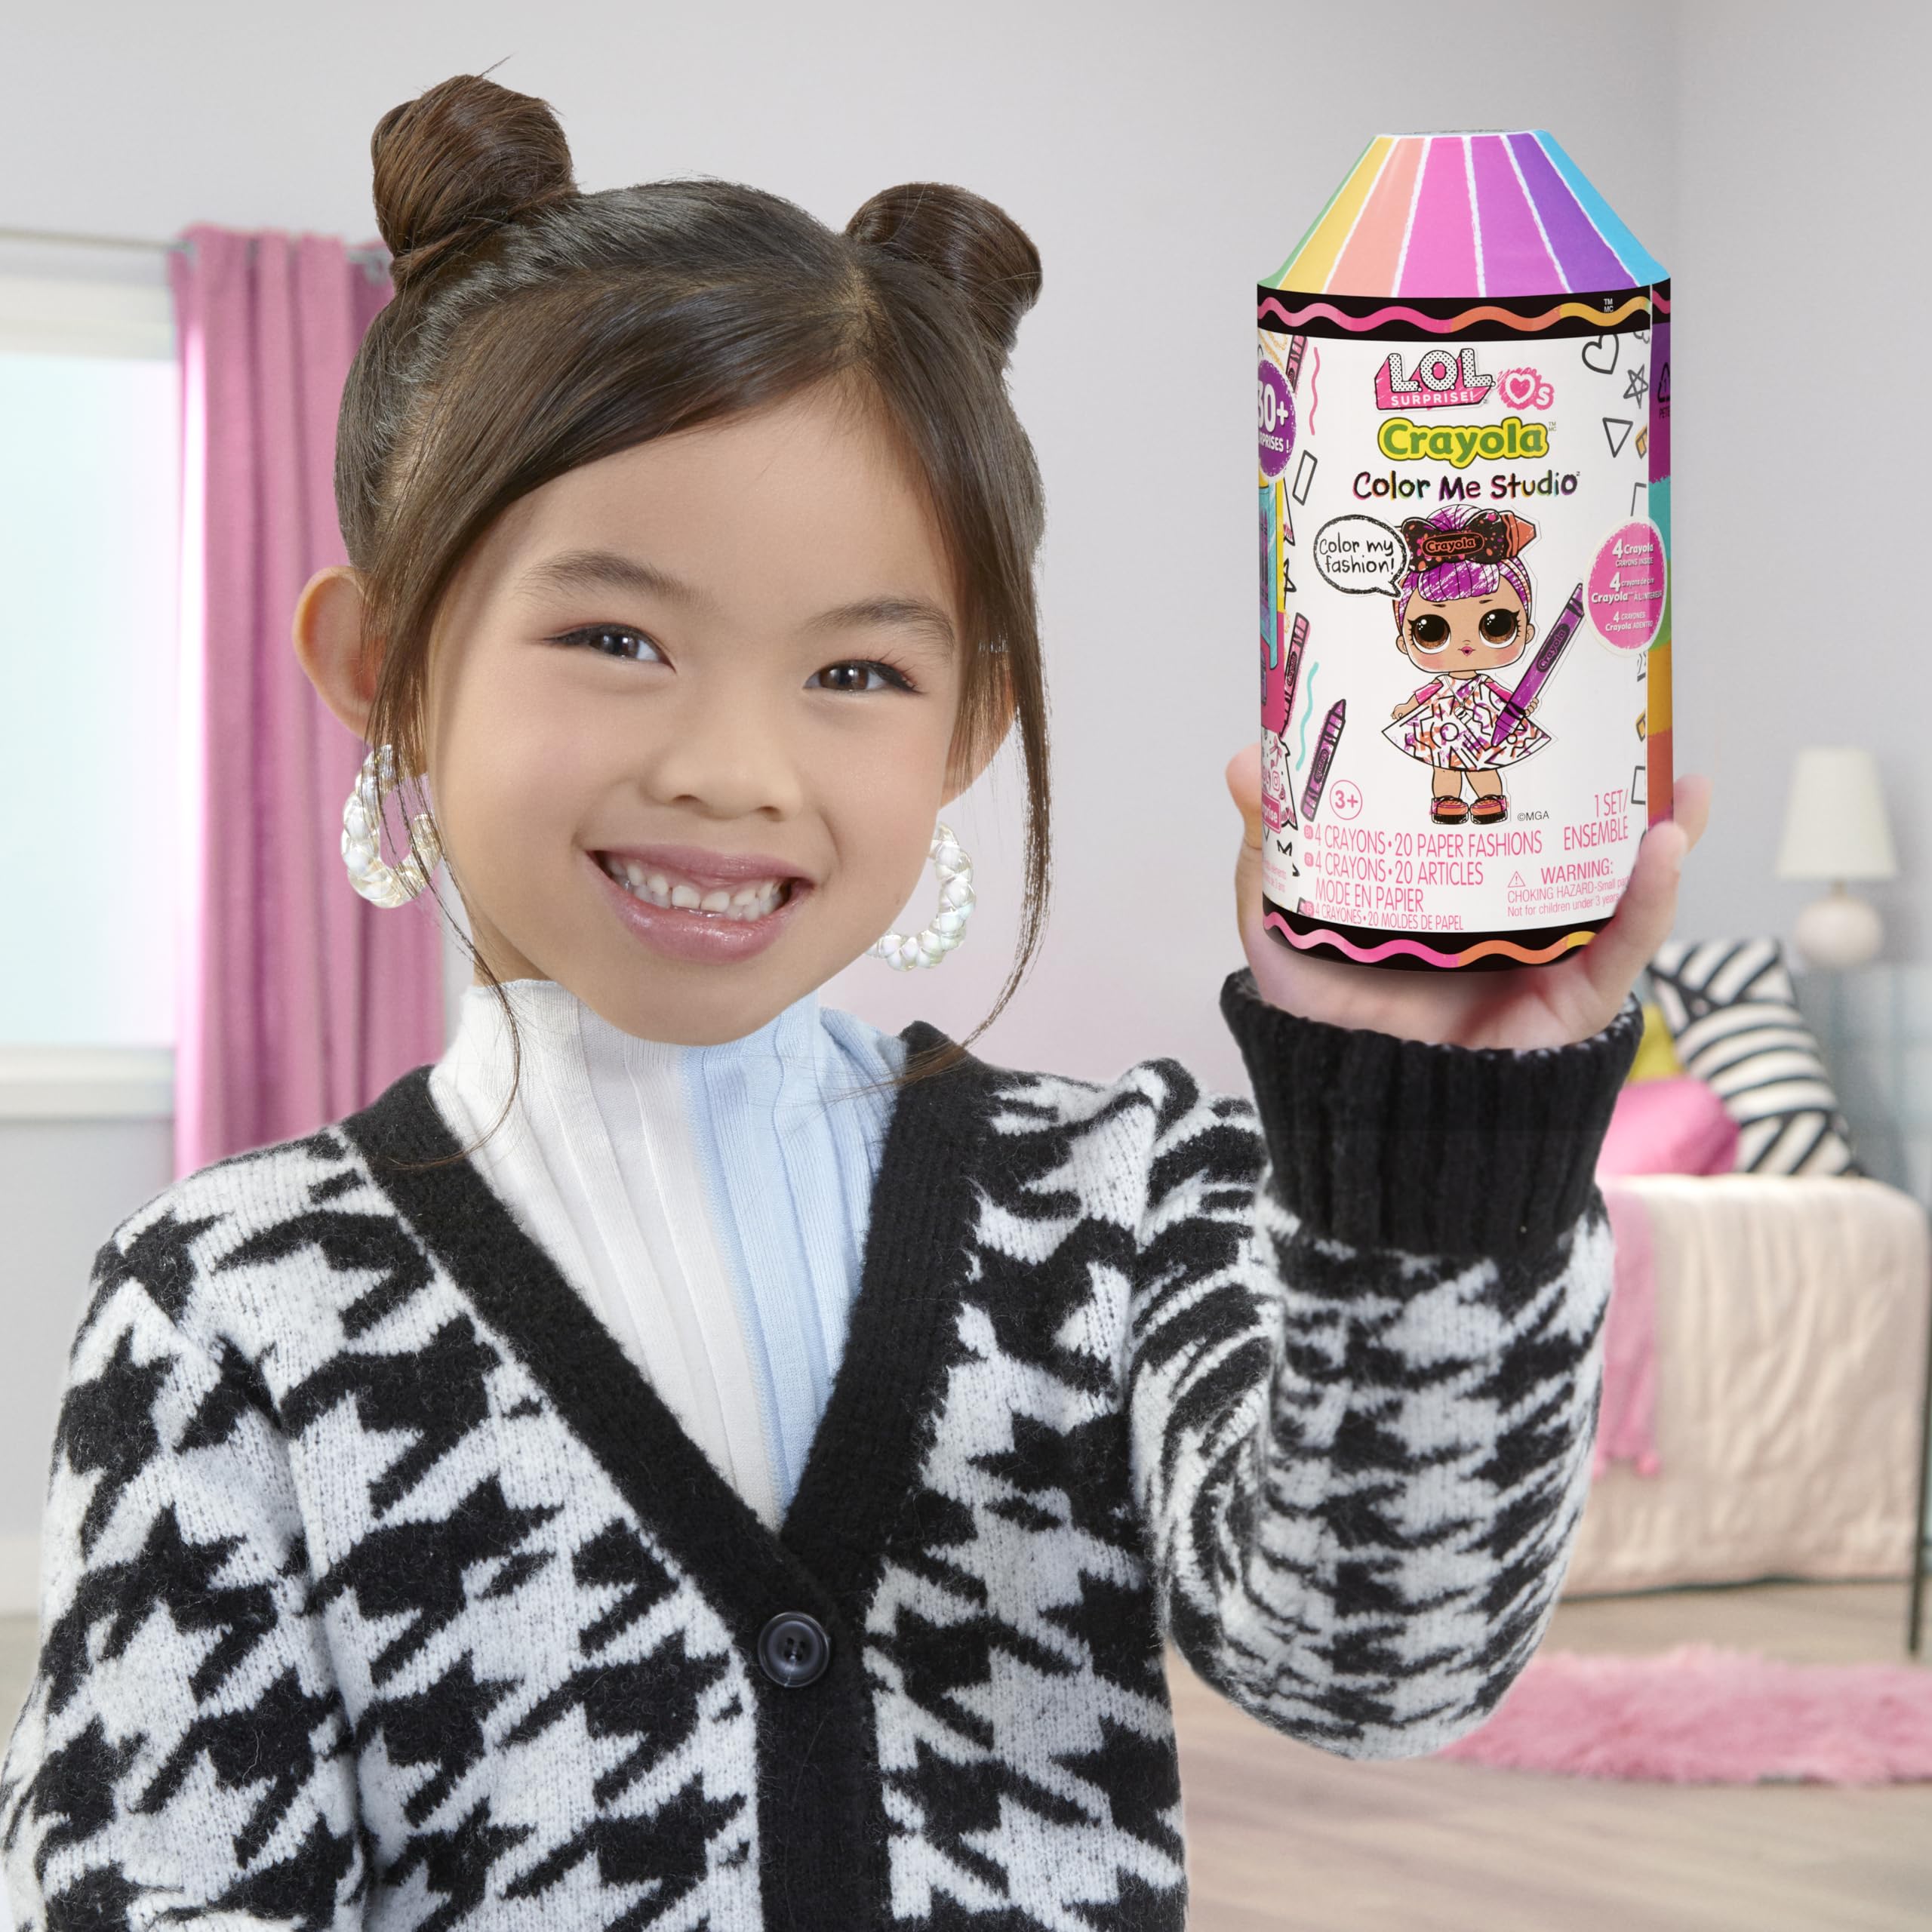 L.O.L. Surprise! Loves CRAYOLA Color Me Studio with Collectible Doll, Over 30 Surprises, Paper Dresses, Crayon Dolls, Art Studio Packaging, Crayon Capsule Packaging, Limited Edition Doll 3+